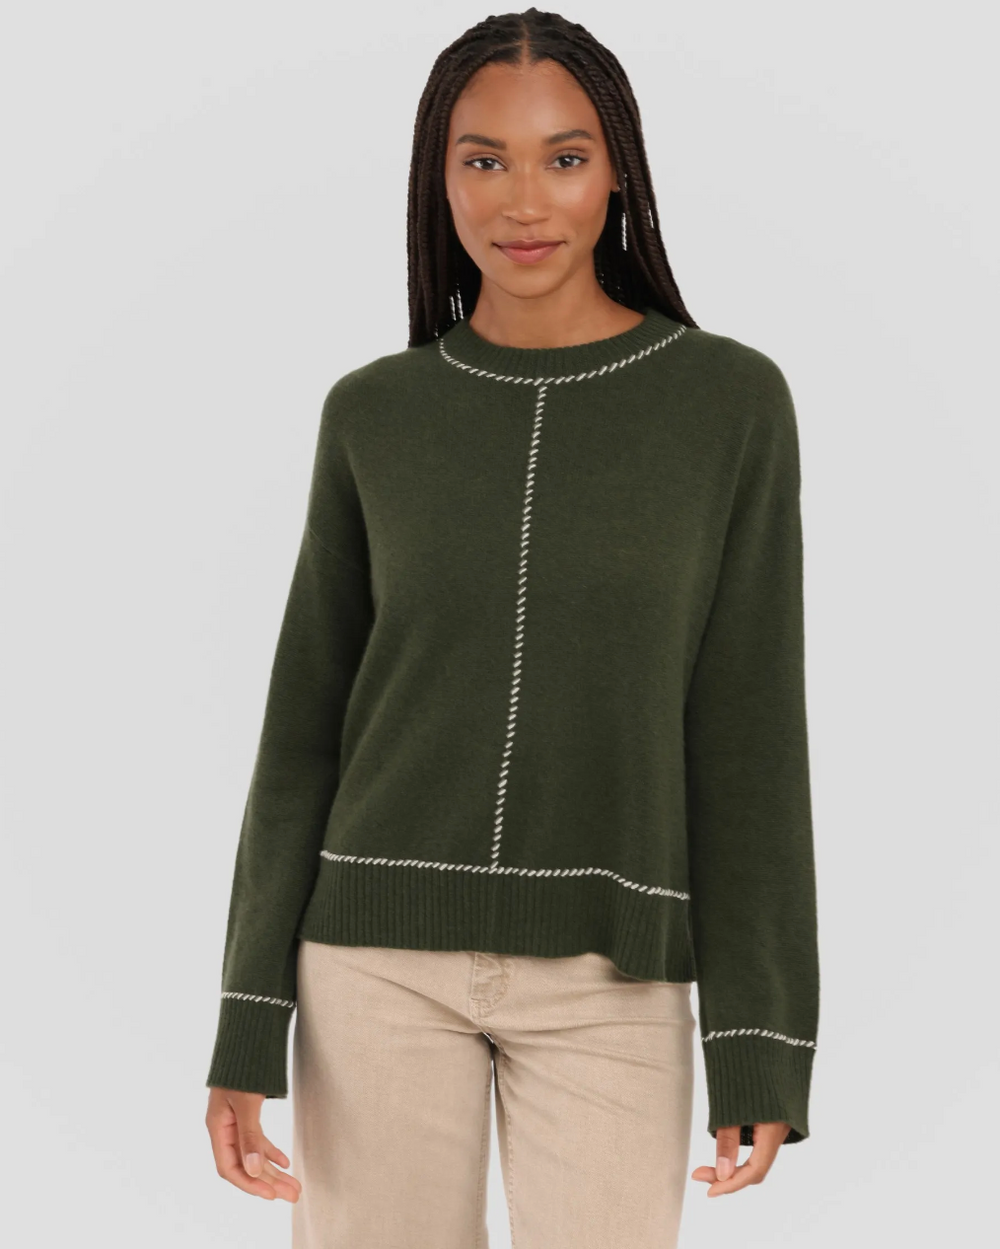 Alashan sweater, cashmere whip-stitch relaxed